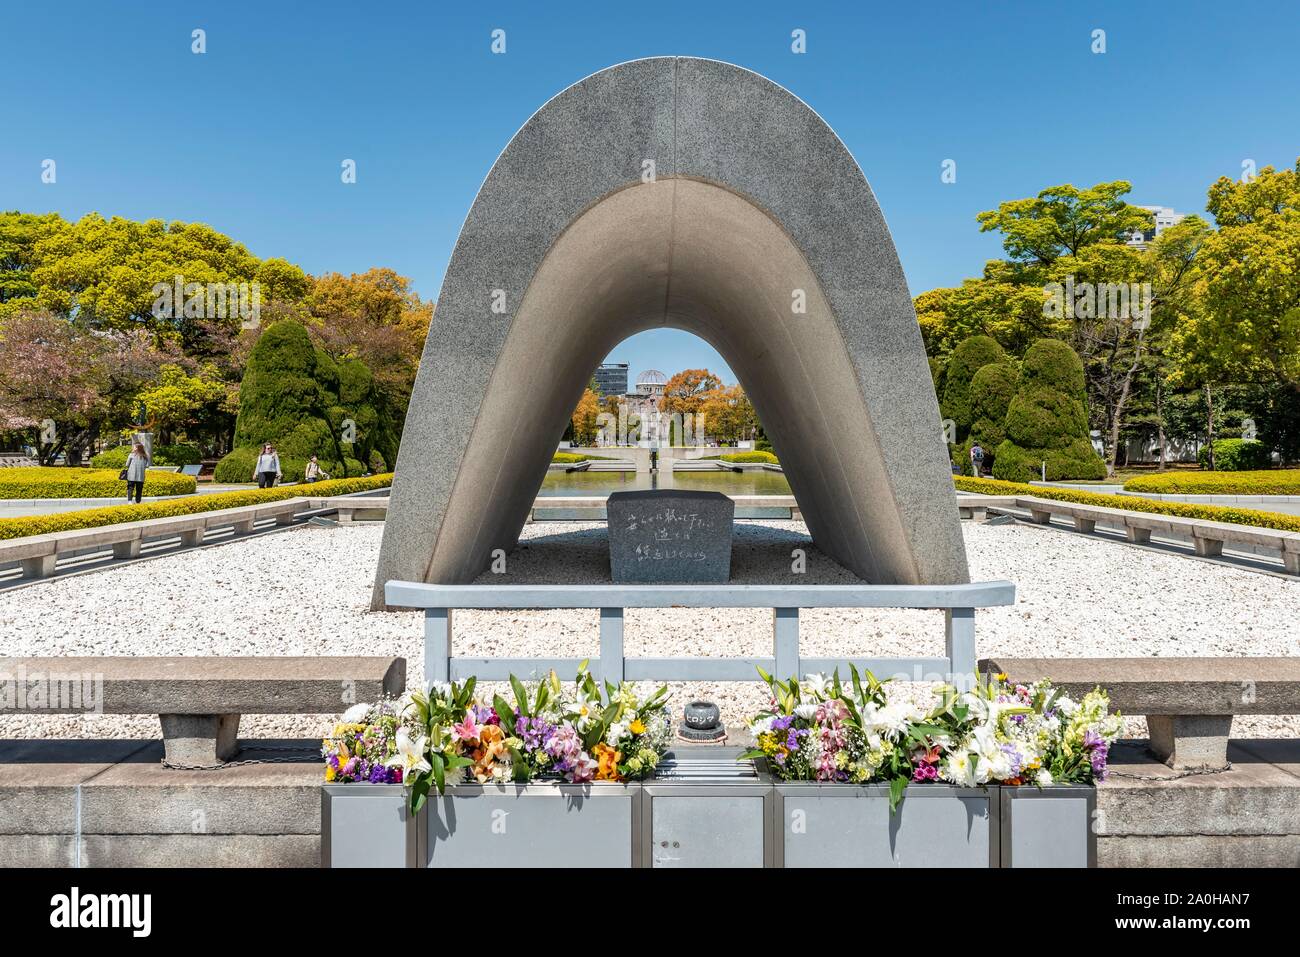 Cenotaph for the victims of the atomic bomb, Hiroshima Victims Memorial Cenotaph, Hiroshima Peace Park, Peace Memorial Park, Hiroshima, Japan Stock Photo